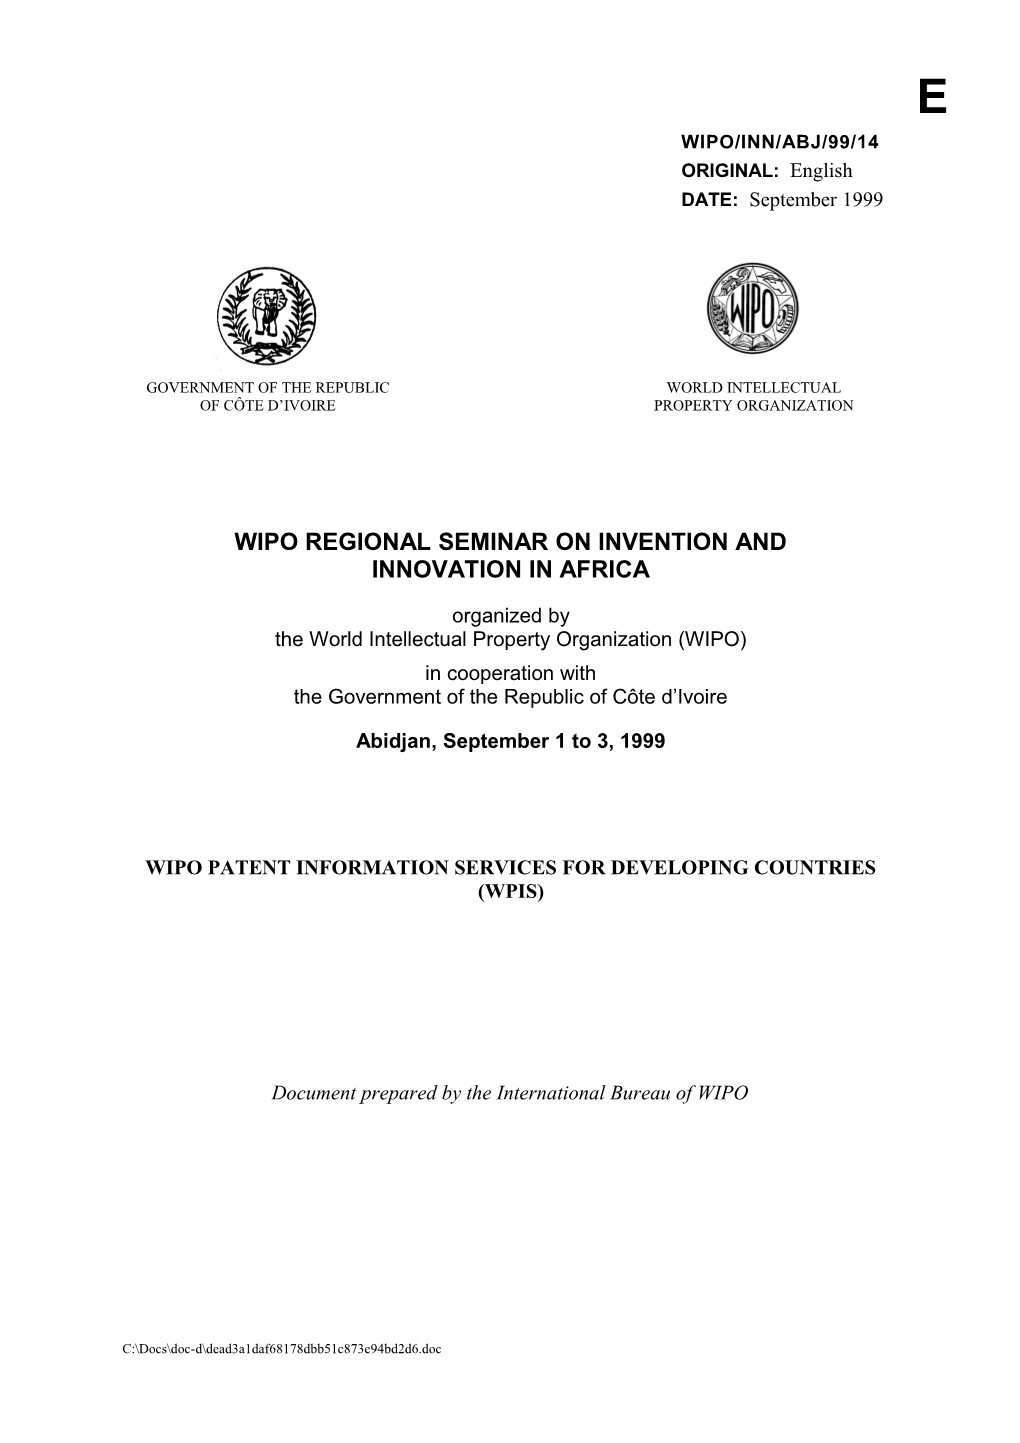 WIPO/INN/ABJ/99/14: WIPO Patent Information Services for Developing Countries(WPIS)